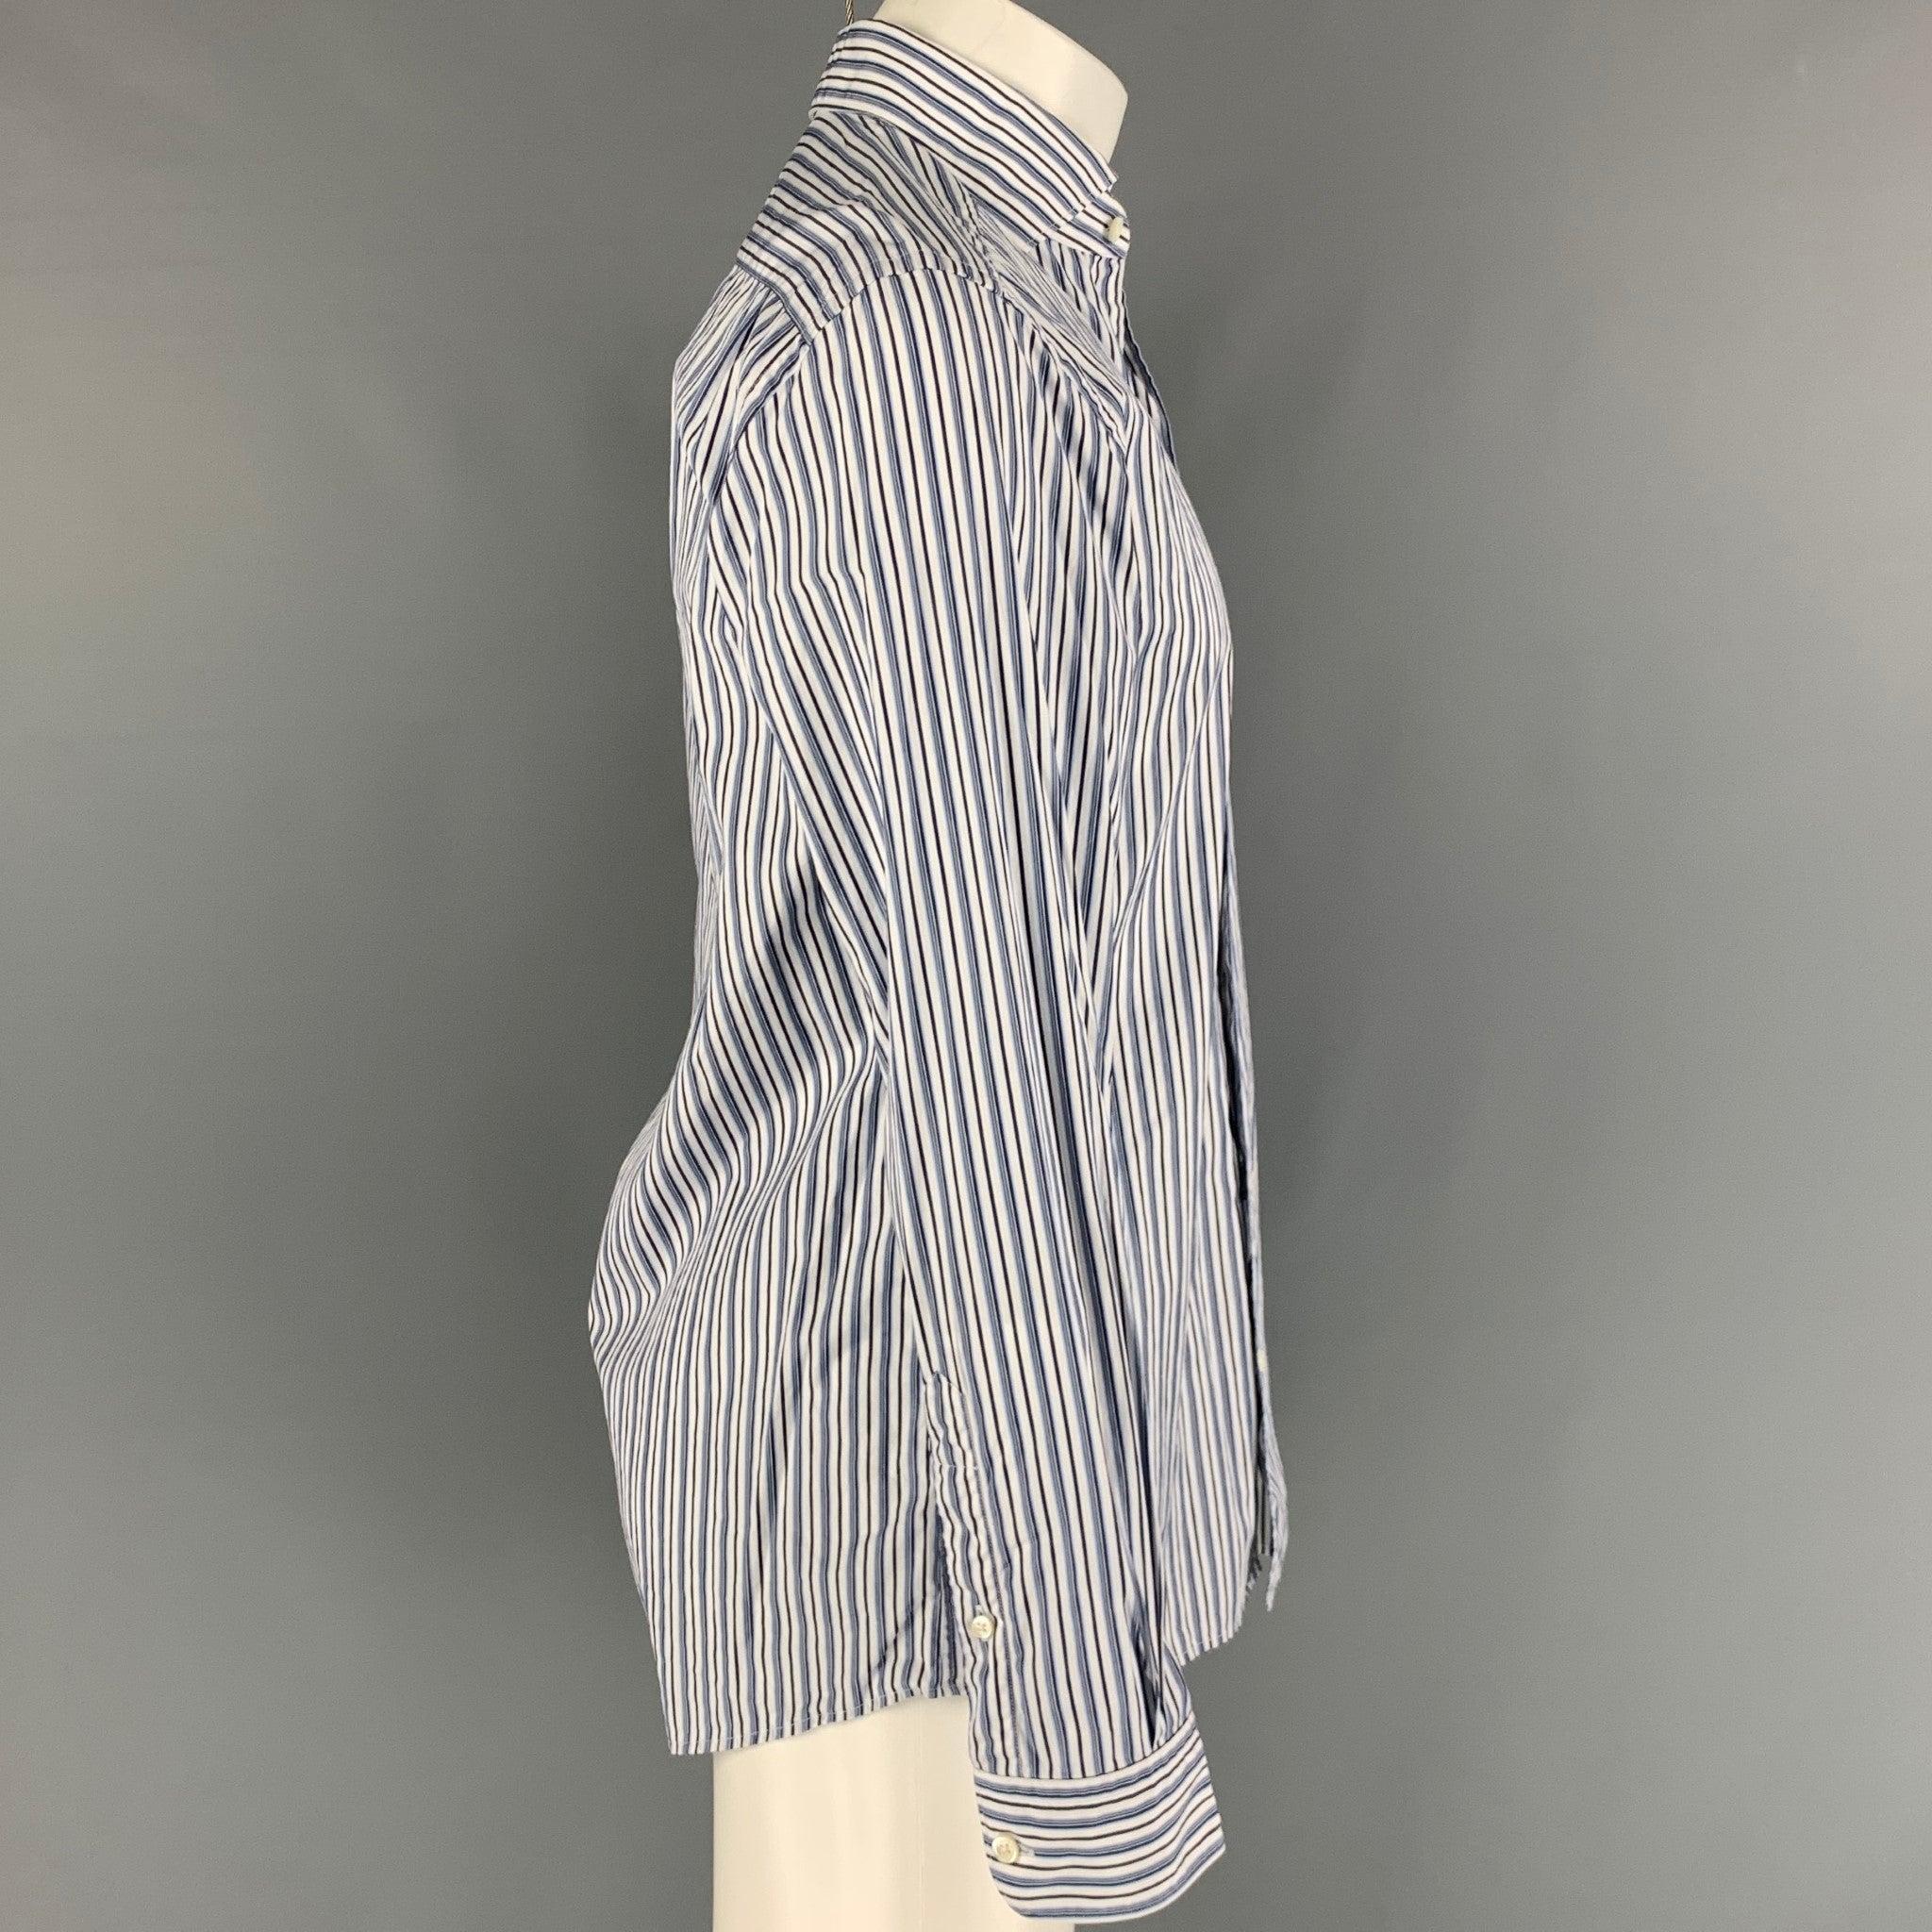 ERMENEGILDO ZEGNA long sleeve shirt comes in white and navy cotton featuring a spread collar, and a button up closure. Excellent Pre-Owned Condition. 

Marked:   M 

Measurements: 
 
Shoulder: 17.5 inches Chest: 43 inches Sleeve: 26 inches Length: